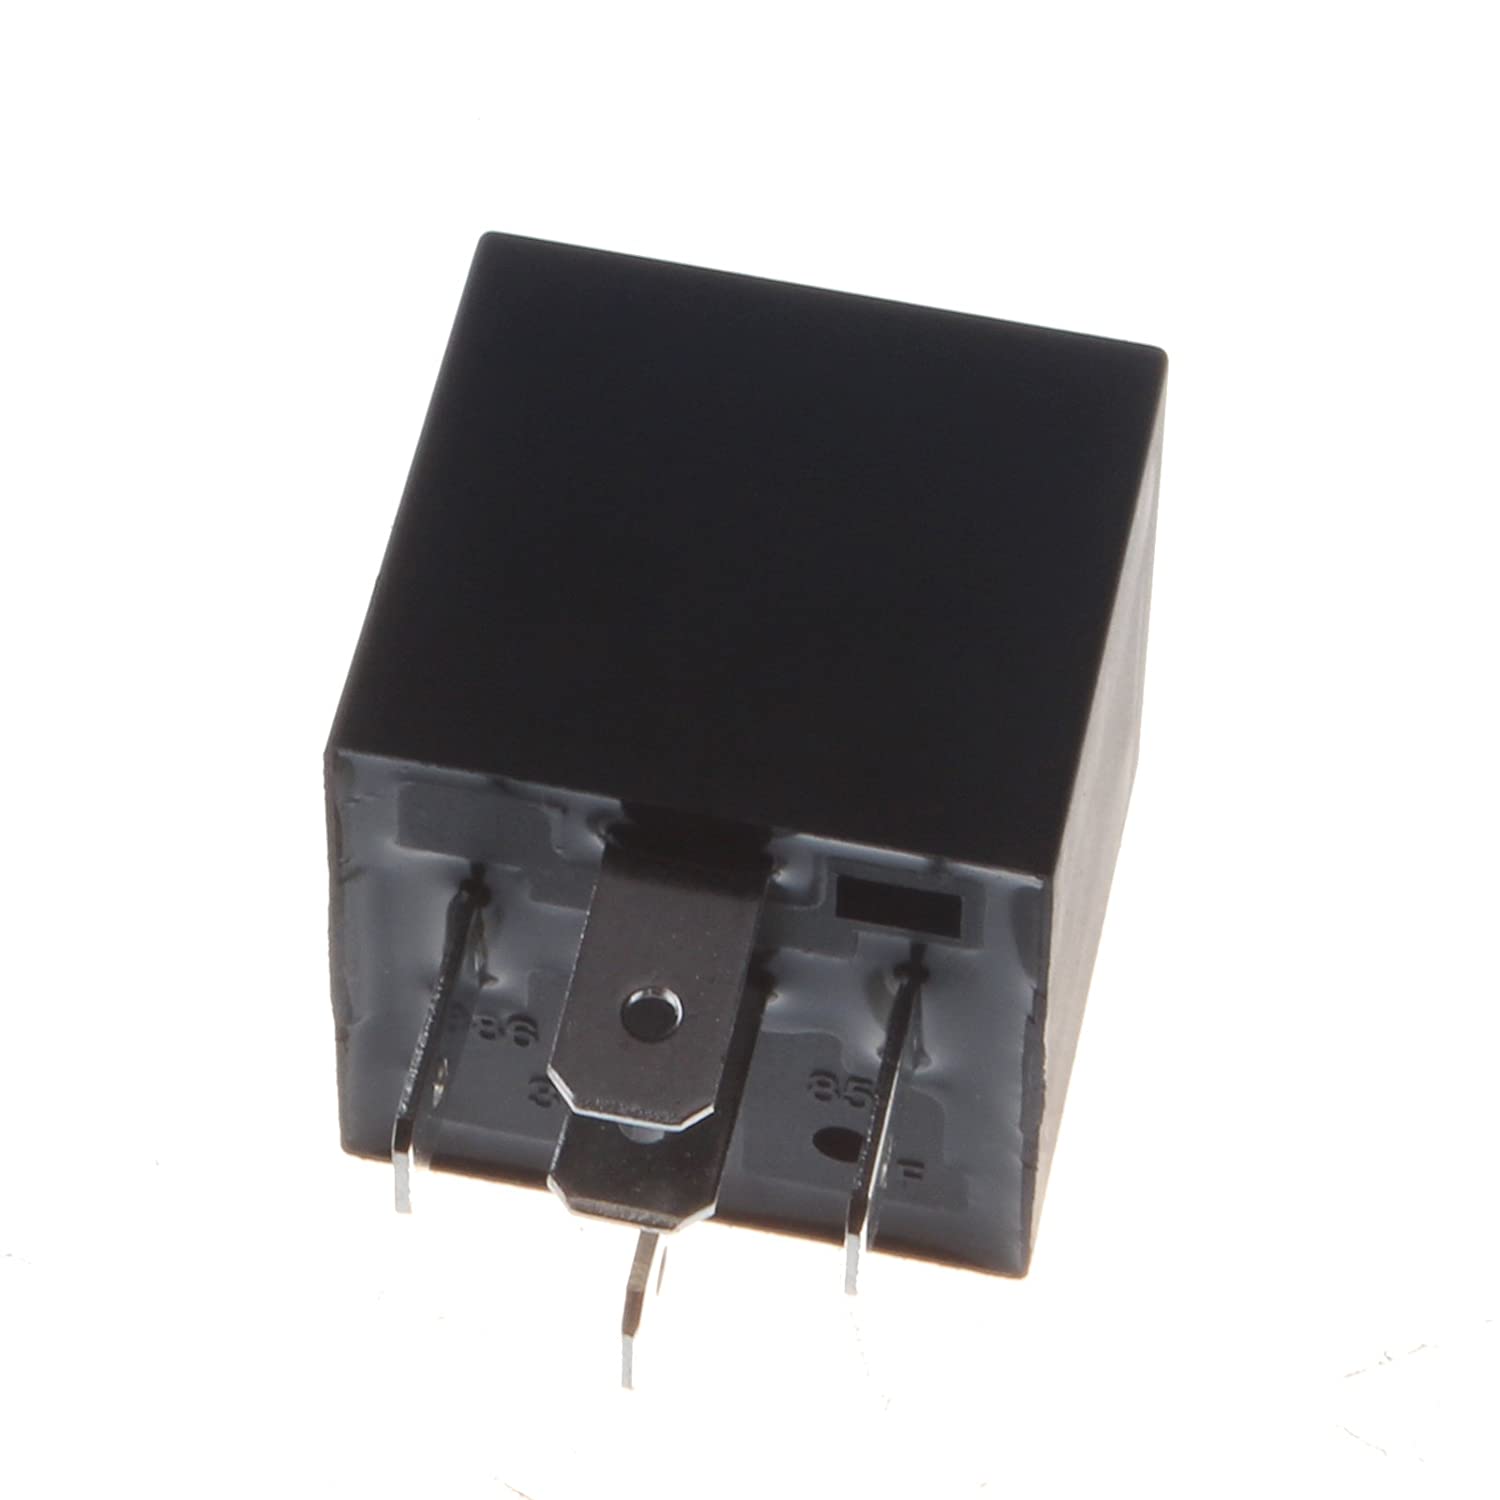 6679820 Relay Switch Fuse Panel for Bobcat 751 753 763 773 863 864 873 883 963 Skid Steer - KUDUPARTS